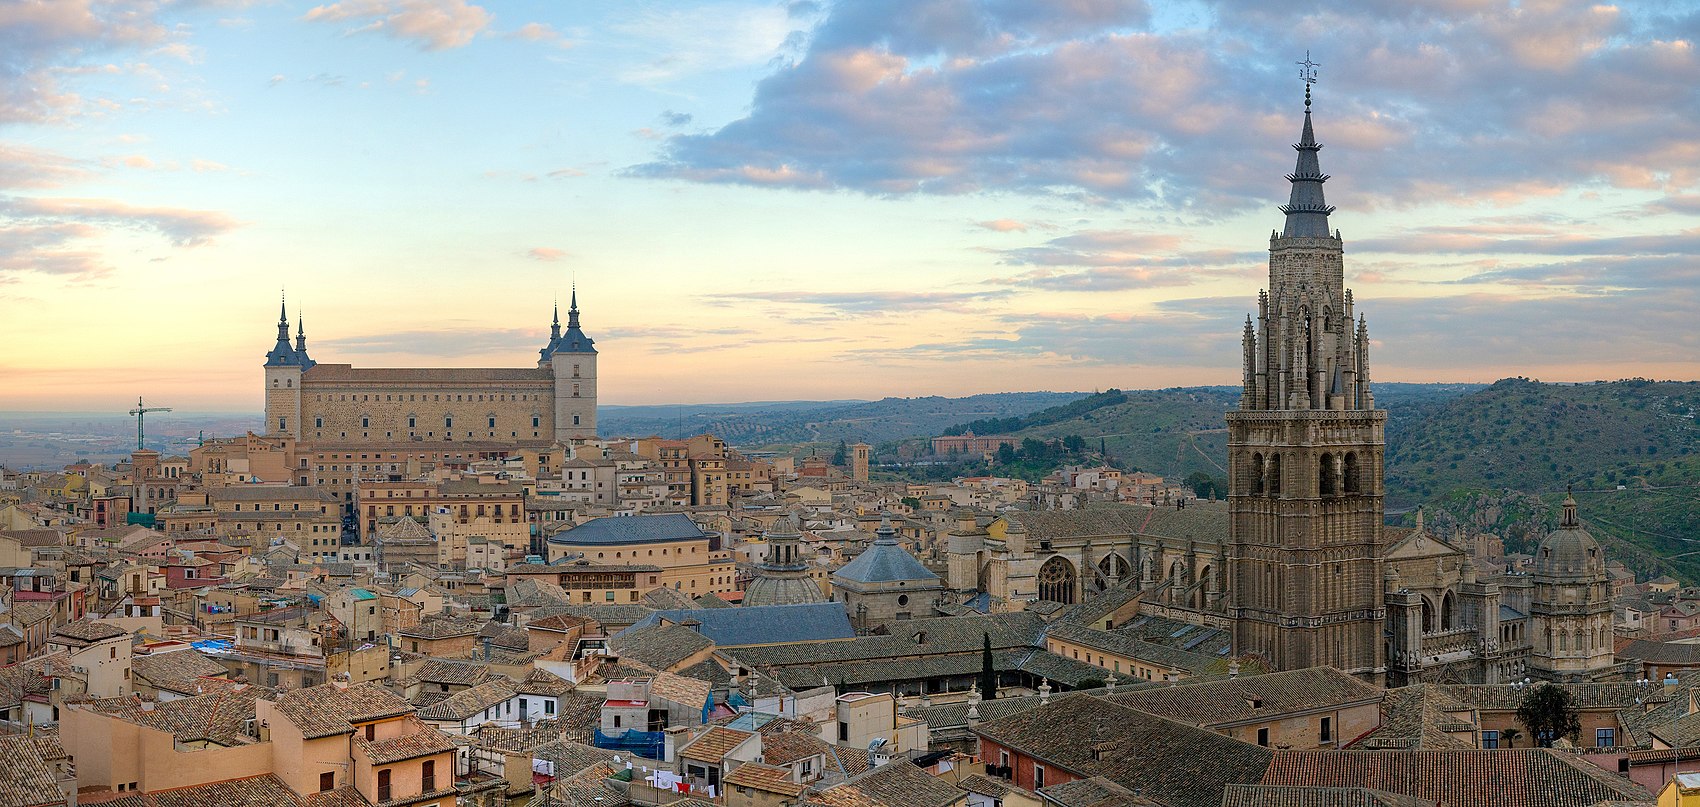 A Panorama of Toledo as seen from Parador Hotel